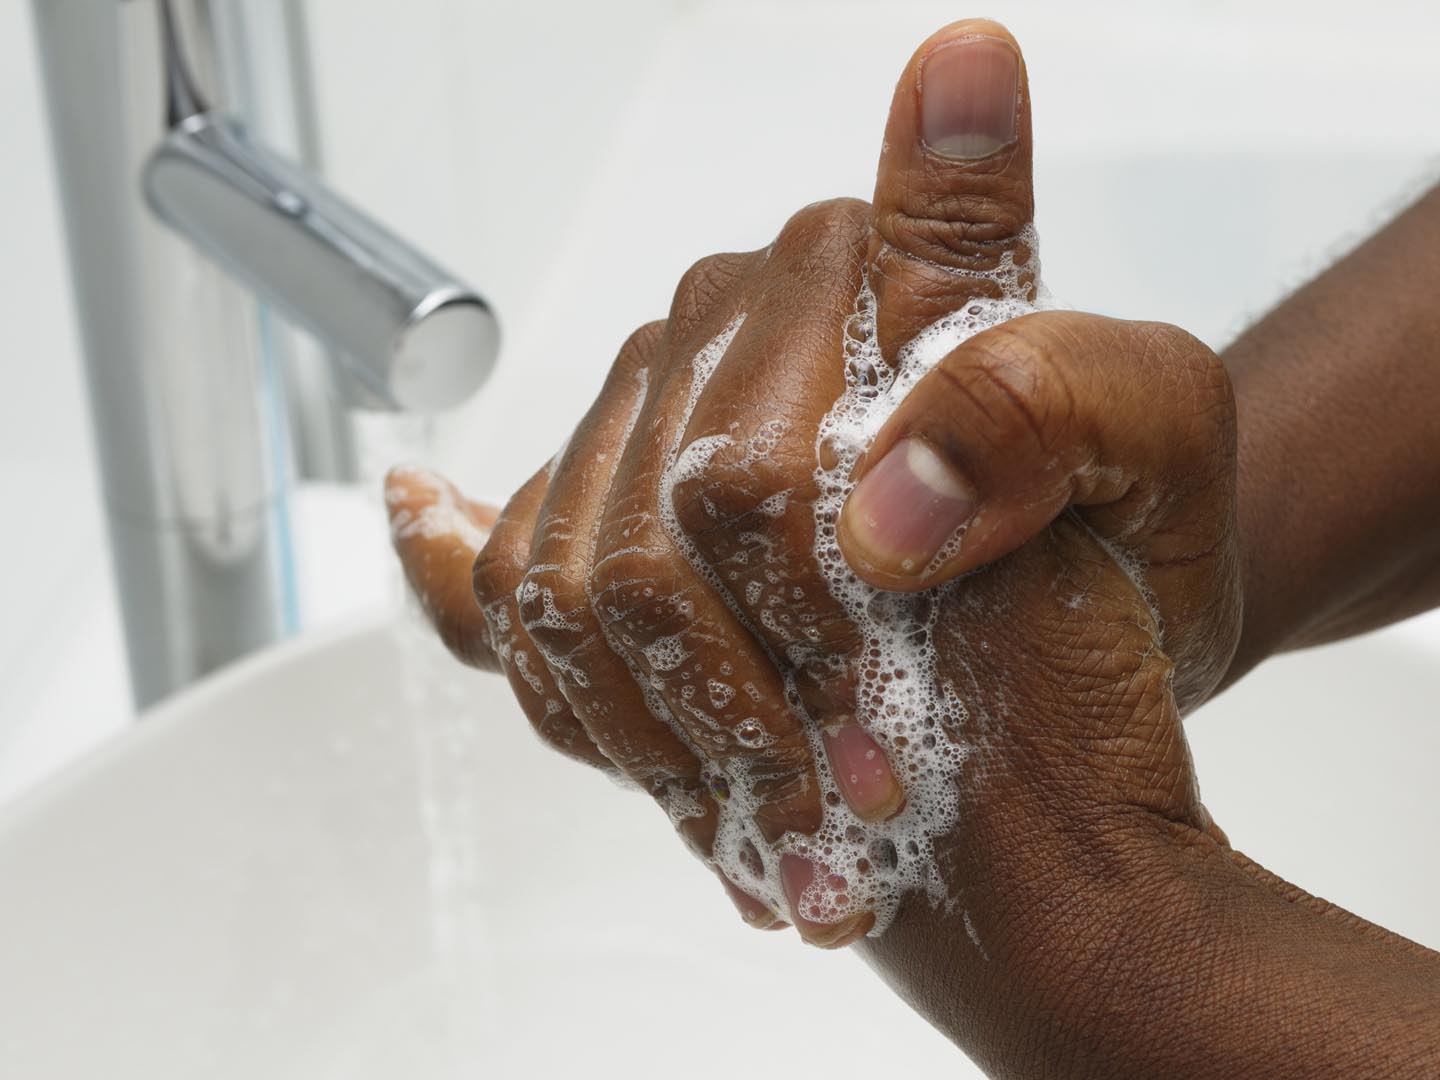 An African American hand washing.  Part of Surgical Scrub Technique for Hand Decontamination